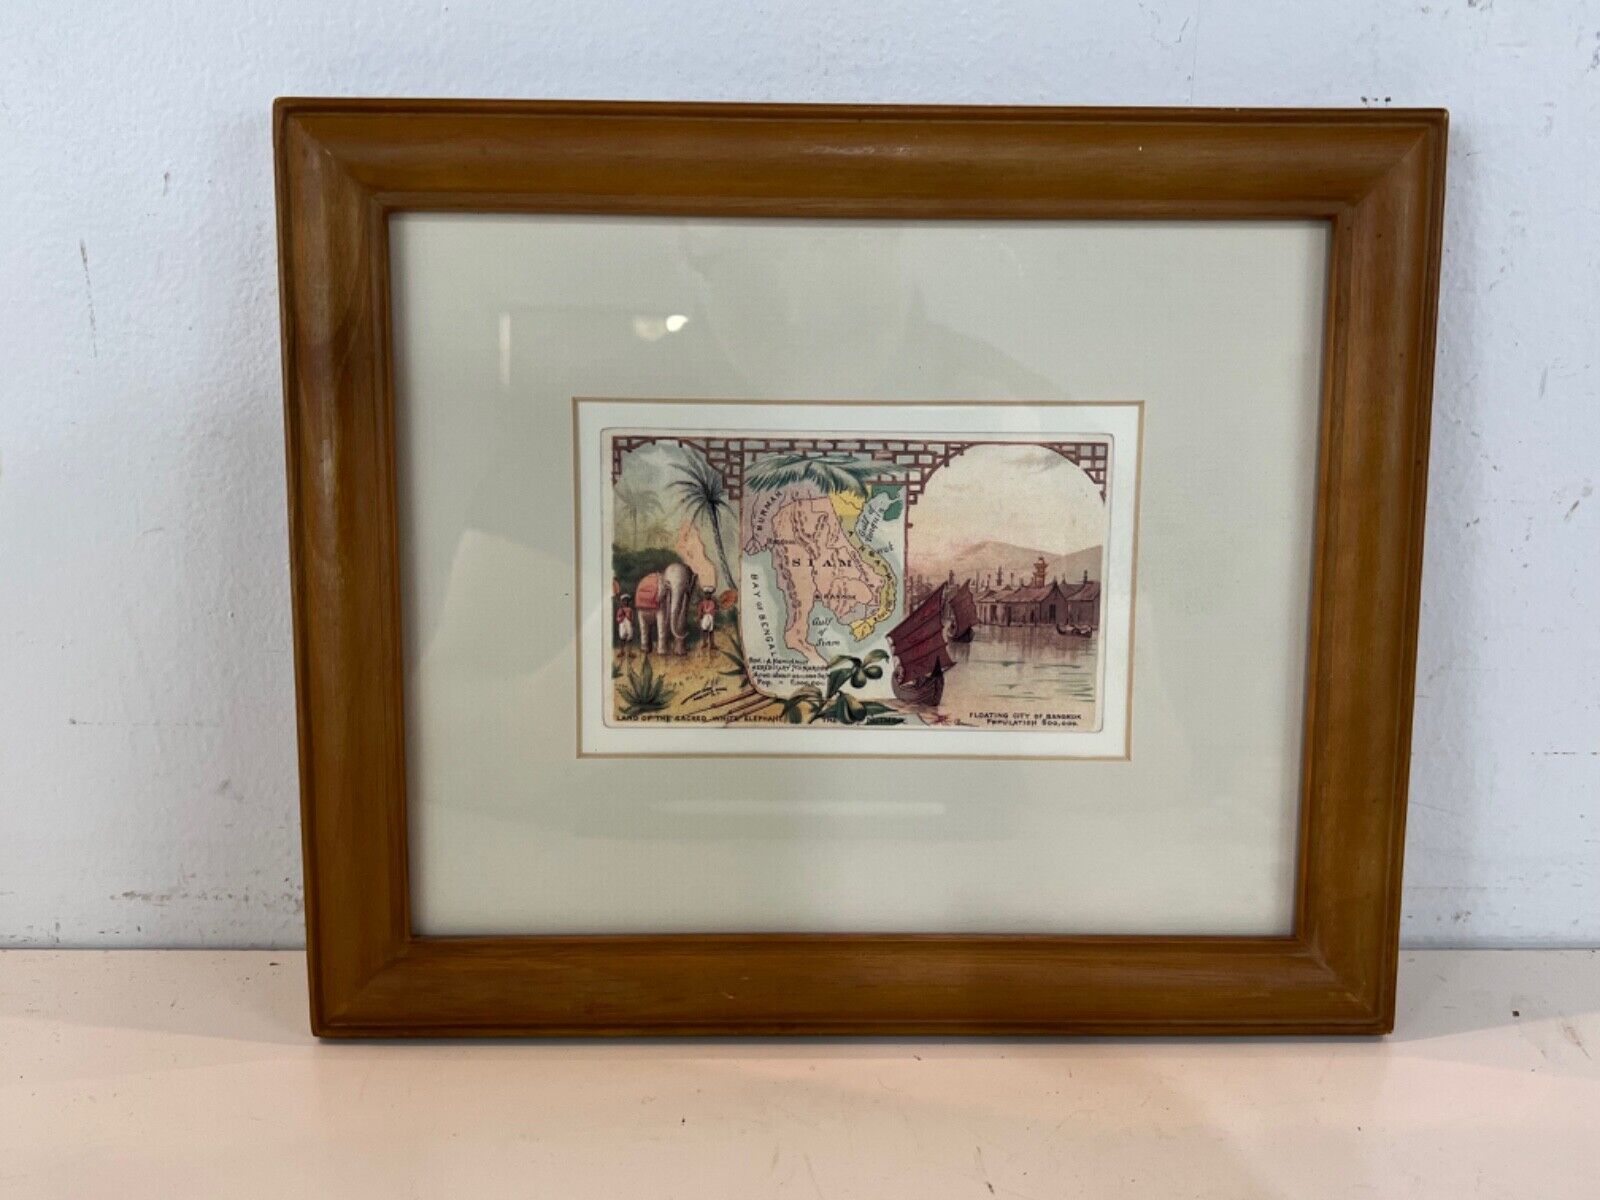 Antique “SIAM” Arbuckle Bros Miniature Map Colored Lithograph Framed